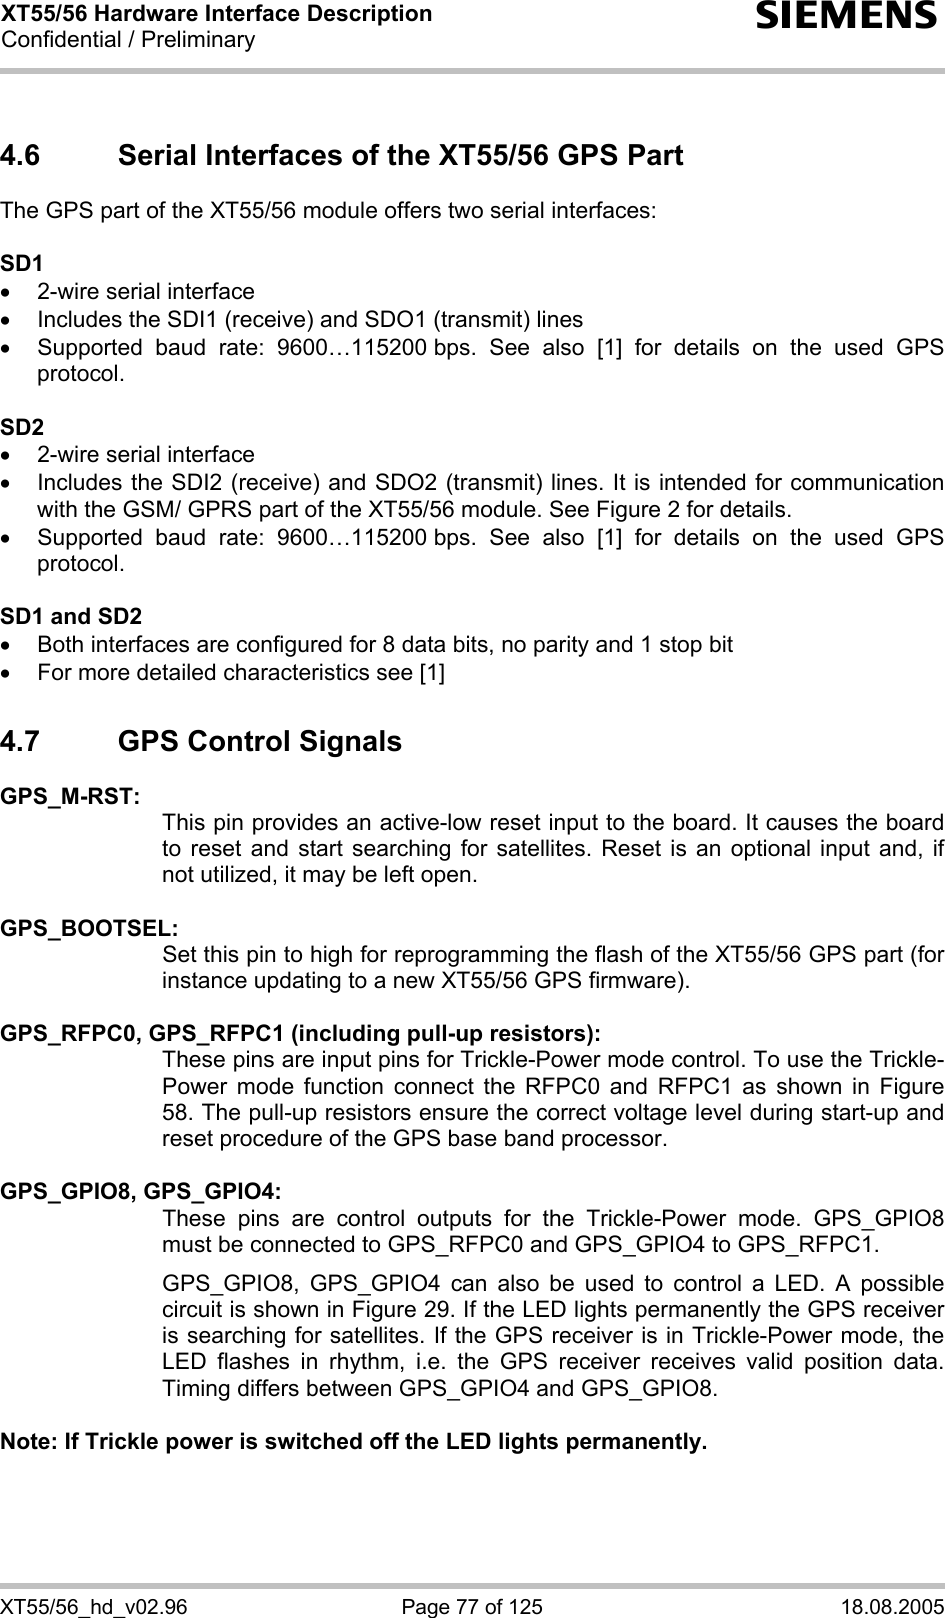 XT55/56 Hardware Interface Description Confidential / Preliminary s XT55/56_hd_v02.96  Page 77 of 125  18.08.2005 4.6  Serial Interfaces of the XT55/56 GPS Part The GPS part of the XT55/56 module offers two serial interfaces:  SD1 •  2-wire serial interface •  Includes the SDI1 (receive) and SDO1 (transmit) lines •  Supported baud rate: 9600…115200 bps. See also [1] for details on the used GPS protocol.  SD2 •  2-wire serial interface •  Includes the SDI2 (receive) and SDO2 (transmit) lines. It is intended for communication with the GSM/ GPRS part of the XT55/56 module. See Figure 2 for details. •  Supported baud rate: 9600…115200 bps. See also [1] for details on the used GPS protocol.  SD1 and SD2 •  Both interfaces are configured for 8 data bits, no parity and 1 stop bit •  For more detailed characteristics see [1] 4.7  GPS Control Signals GPS_M-RST:   This pin provides an active-low reset input to the board. It causes the board to reset and start searching for satellites. Reset is an optional input and, if not utilized, it may be left open.  GPS_BOOTSEL:   Set this pin to high for reprogramming the flash of the XT55/56 GPS part (for instance updating to a new XT55/56 GPS firmware).  GPS_RFPC0, GPS_RFPC1 (including pull-up resistors): These pins are input pins for Trickle-Power mode control. To use the Trickle-Power mode function connect the RFPC0 and RFPC1 as shown in Figure 58. The pull-up resistors ensure the correct voltage level during start-up and reset procedure of the GPS base band processor.  GPS_GPIO8, GPS_GPIO4:   These pins are control outputs for the Trickle-Power mode. GPS_GPIO8 must be connected to GPS_RFPC0 and GPS_GPIO4 to GPS_RFPC1.  GPS_GPIO8, GPS_GPIO4 can also be used to control a LED. A possible circuit is shown in Figure 29. If the LED lights permanently the GPS receiver is searching for satellites. If the GPS receiver is in Trickle-Power mode, the LED flashes in rhythm, i.e. the GPS receiver receives valid position data. Timing differs between GPS_GPIO4 and GPS_GPIO8.  Note: If Trickle power is switched off the LED lights permanently.  